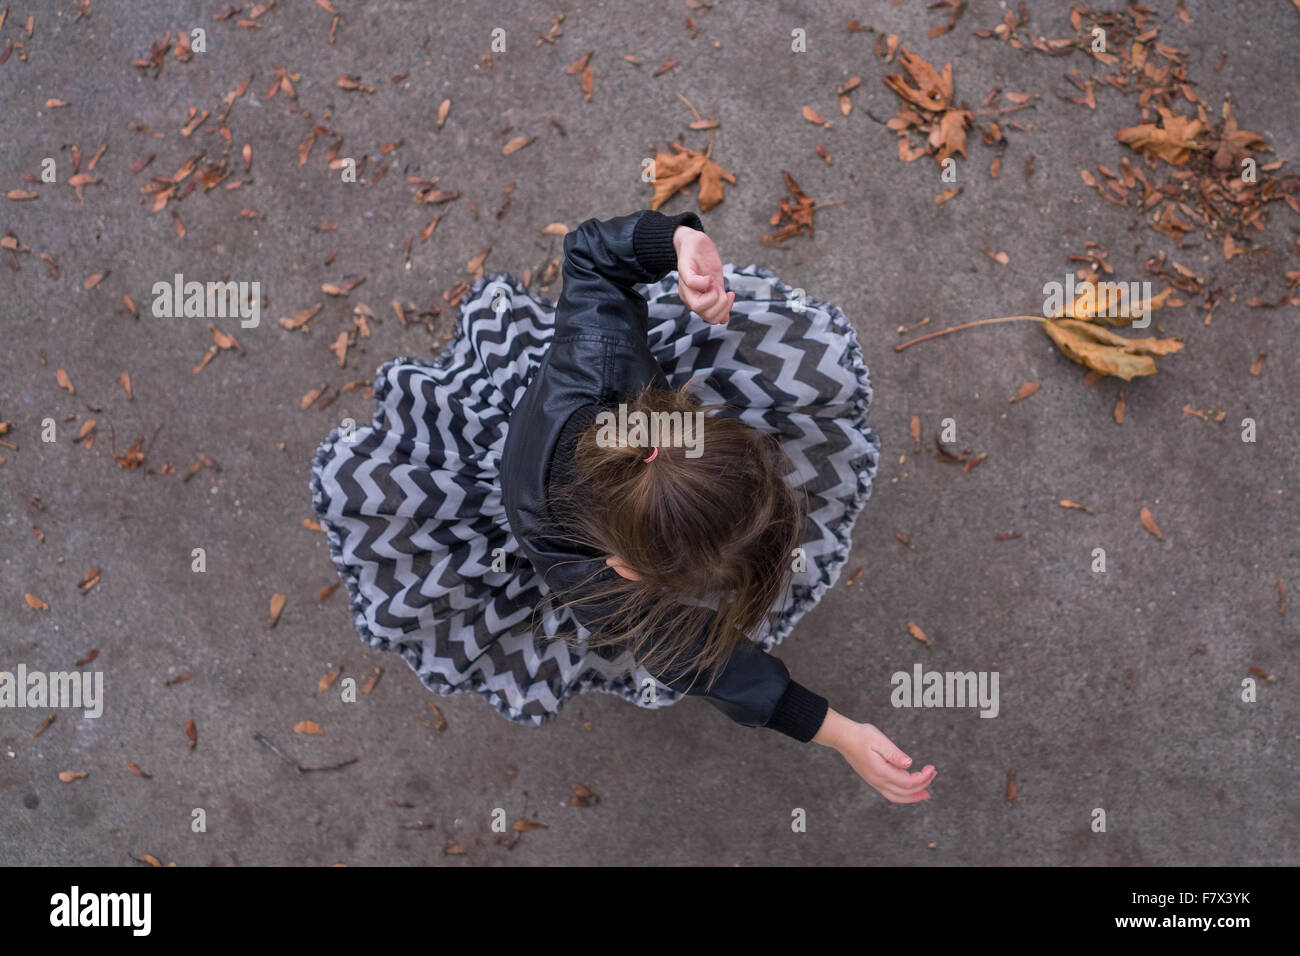 Overhead view of a Girl spinning around Stock Photo